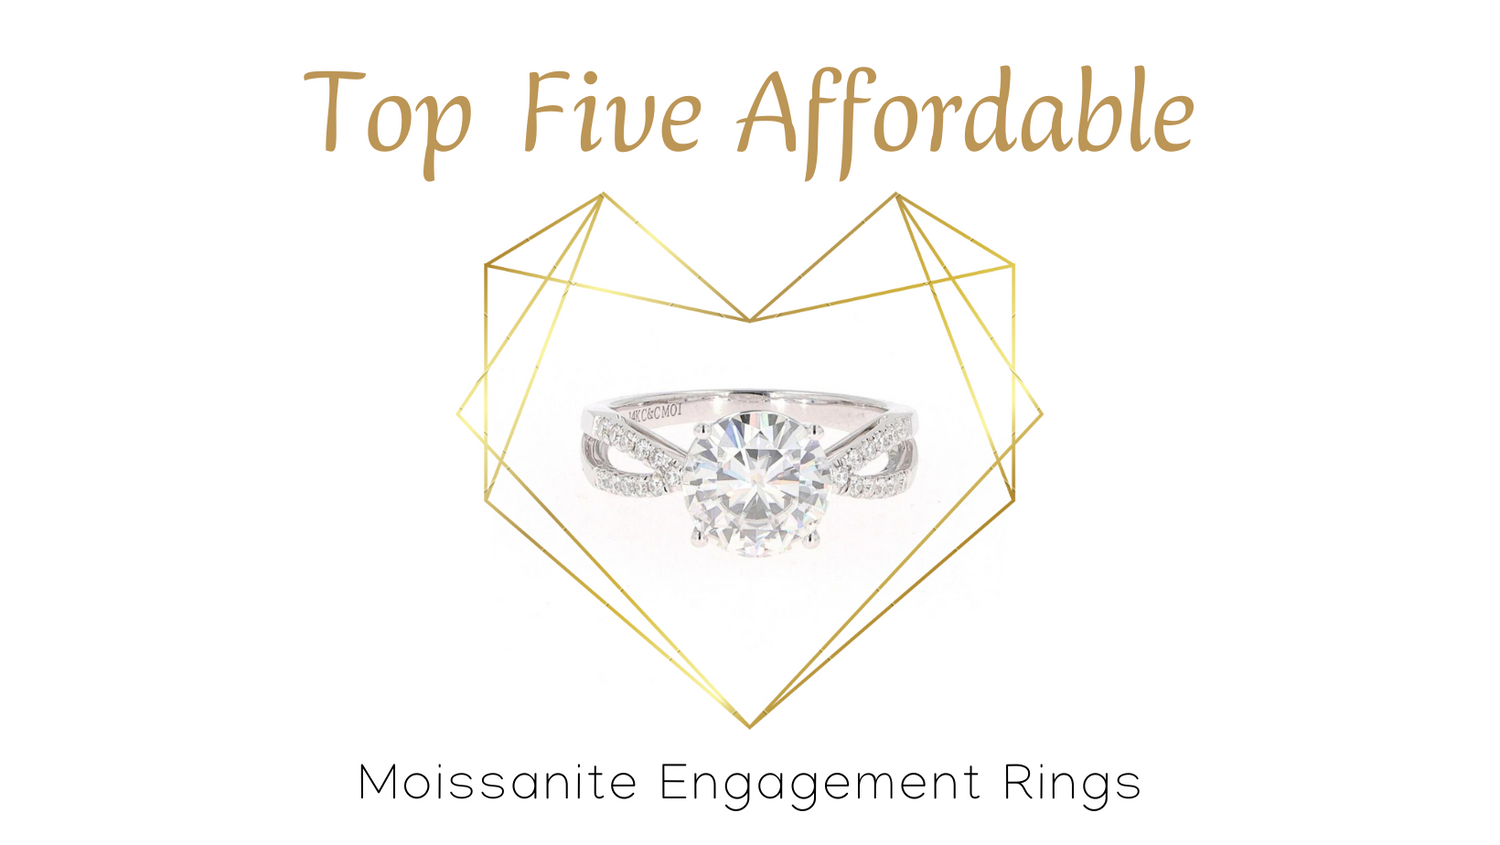 Top Five Affordable Moissanite Engagement Rings